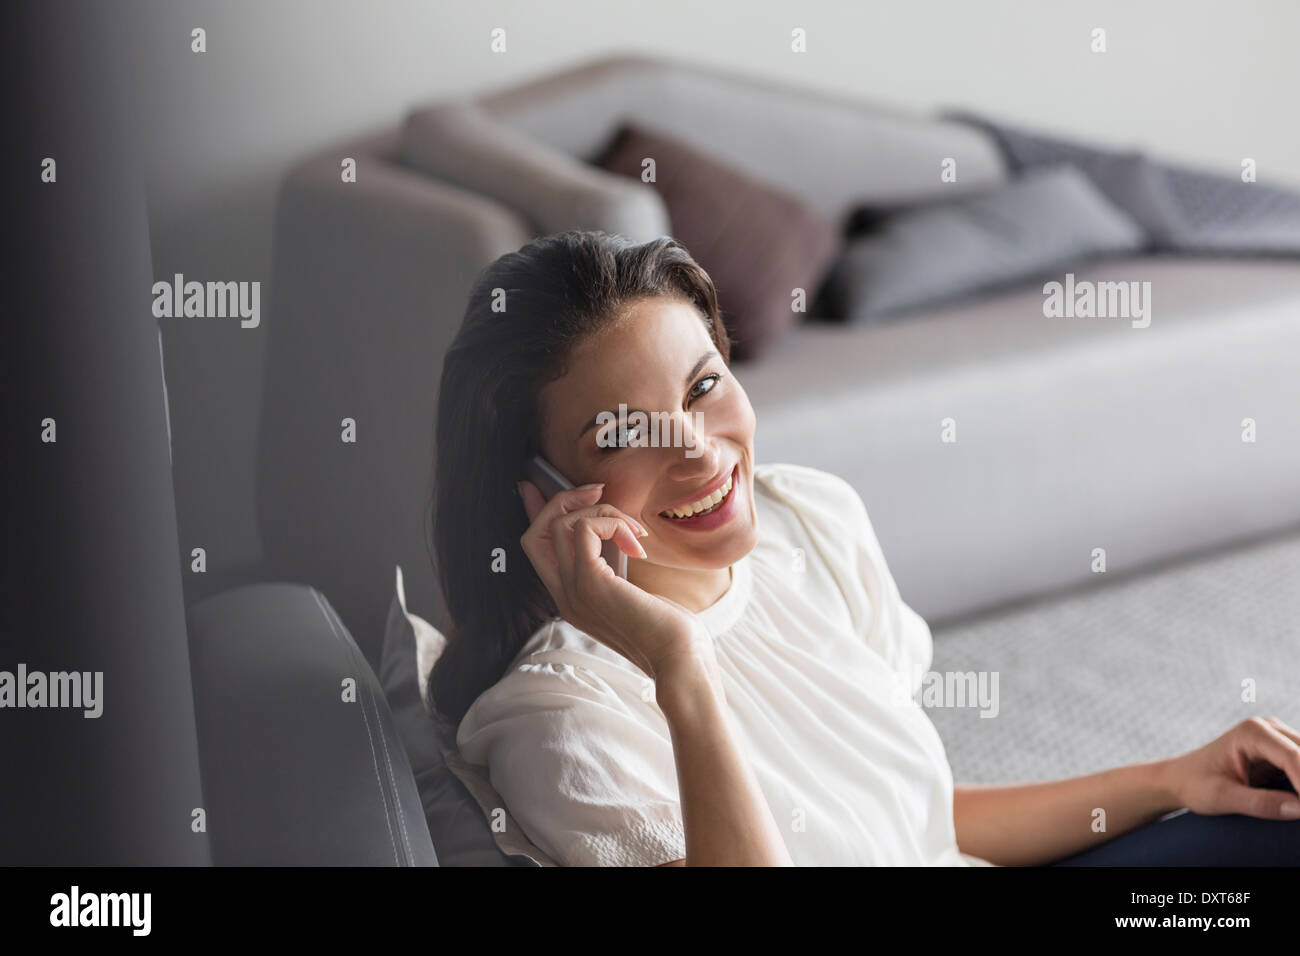 Portrait of confident woman talking on cell phone Stock Photo